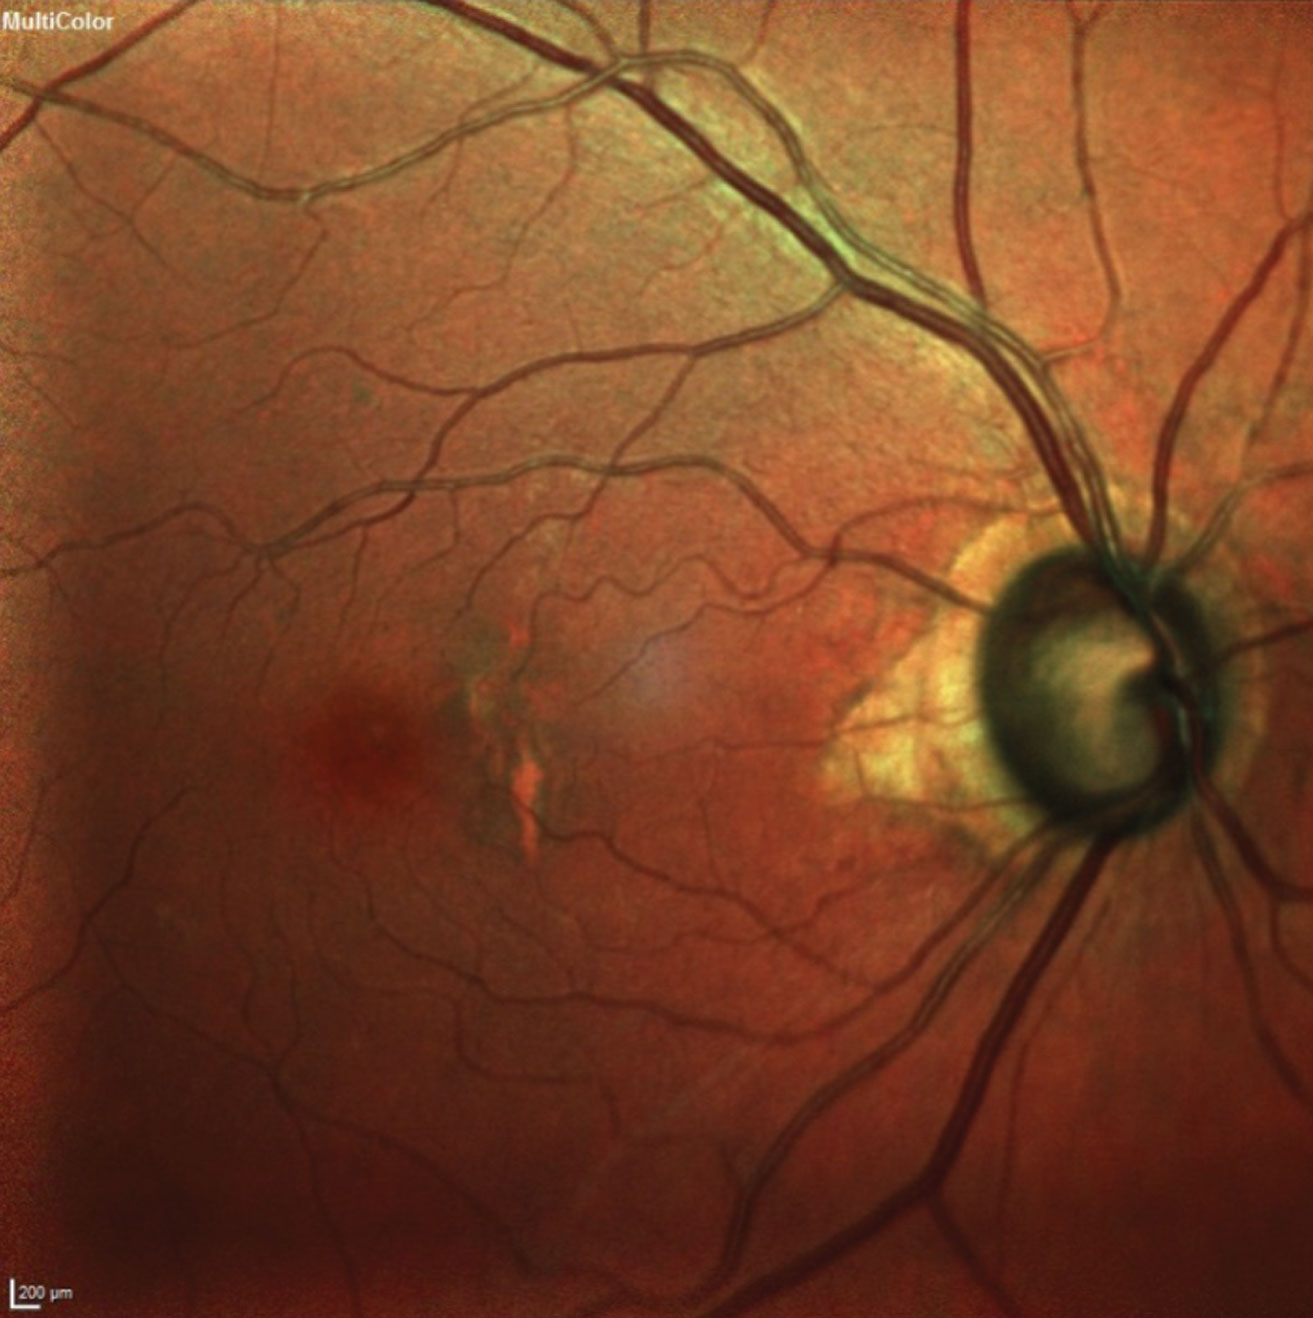 This 77-year-old patient’s fundus image shows advanced glaucomatous damage and macular changes consistent with her age.